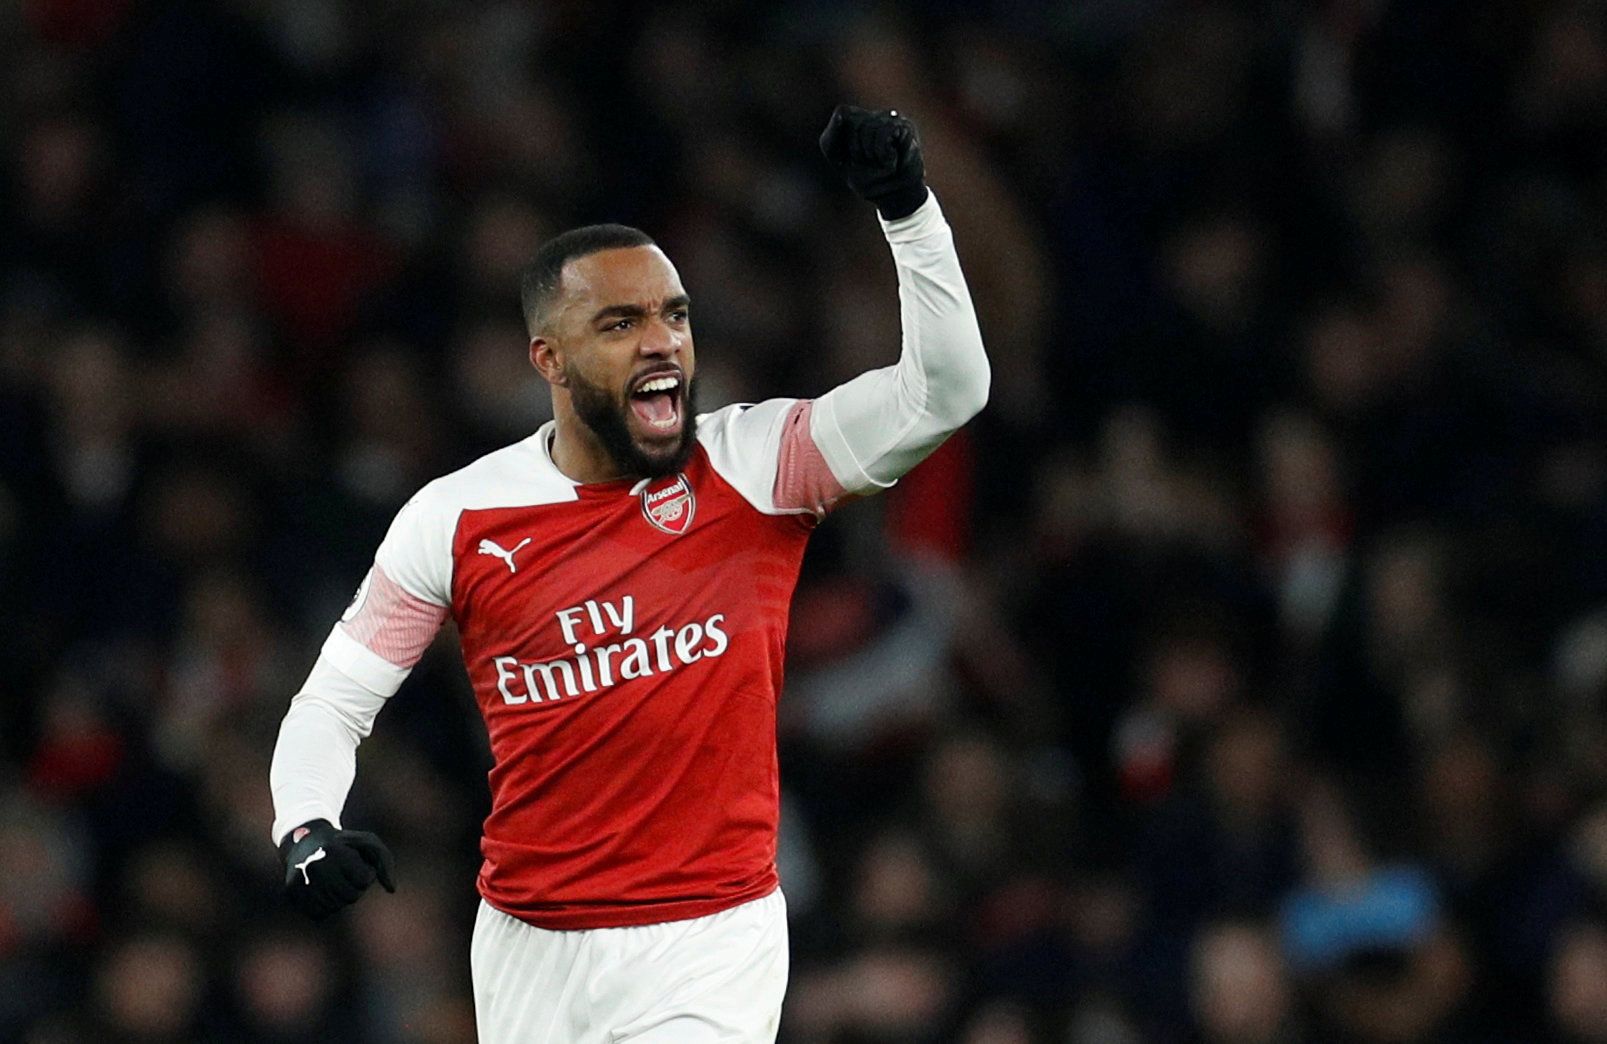 Soccer Football - Premier League - Arsenal v Chelsea - Emirates Stadium, London, Britain - January 19, 2019  Arsenal's Alexandre Lacazette celebrates scoring their first goal   Action Images via Reuters/John Sibley  EDITORIAL USE ONLY. No use with unauthorized audio, video, data, fixture lists, club/league logos or 